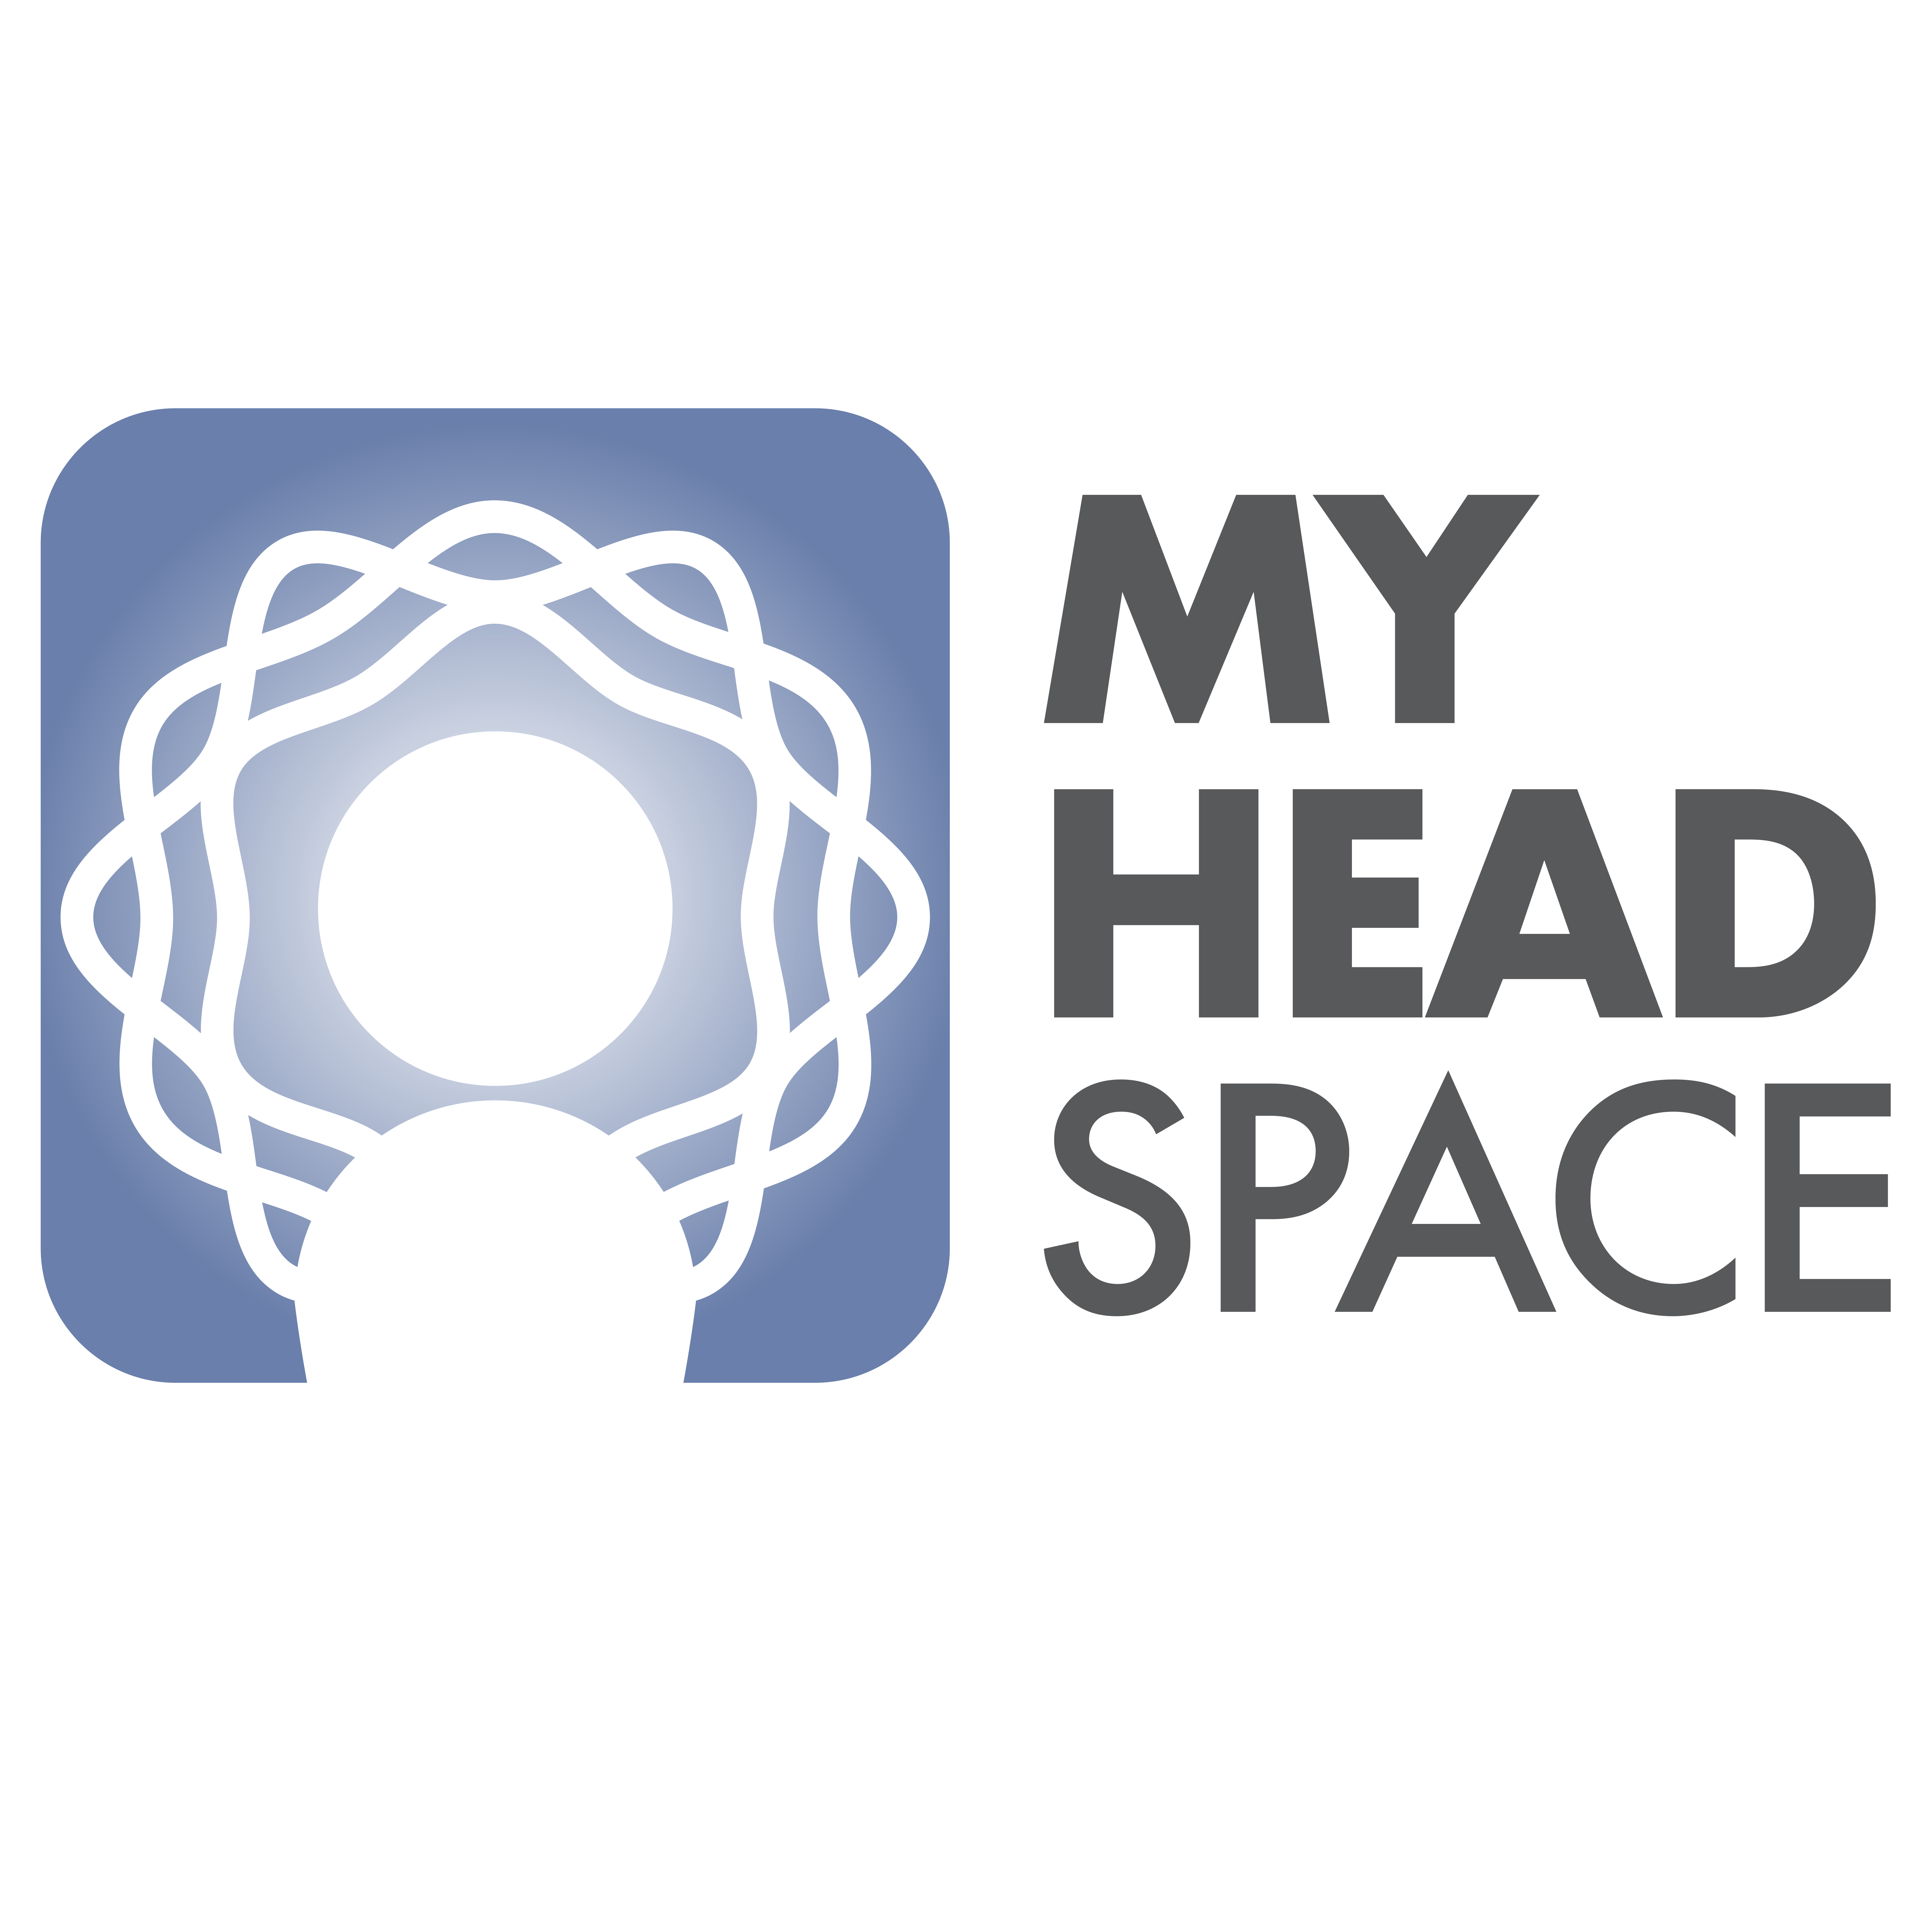 Logo of My Head Space, featuring an outline of a human head and shoulders in white, surrounded by concentric, interwoven circles in shades of blue, with the text 'MY HEAD SPACE' in uppercase, bold letters to the right.